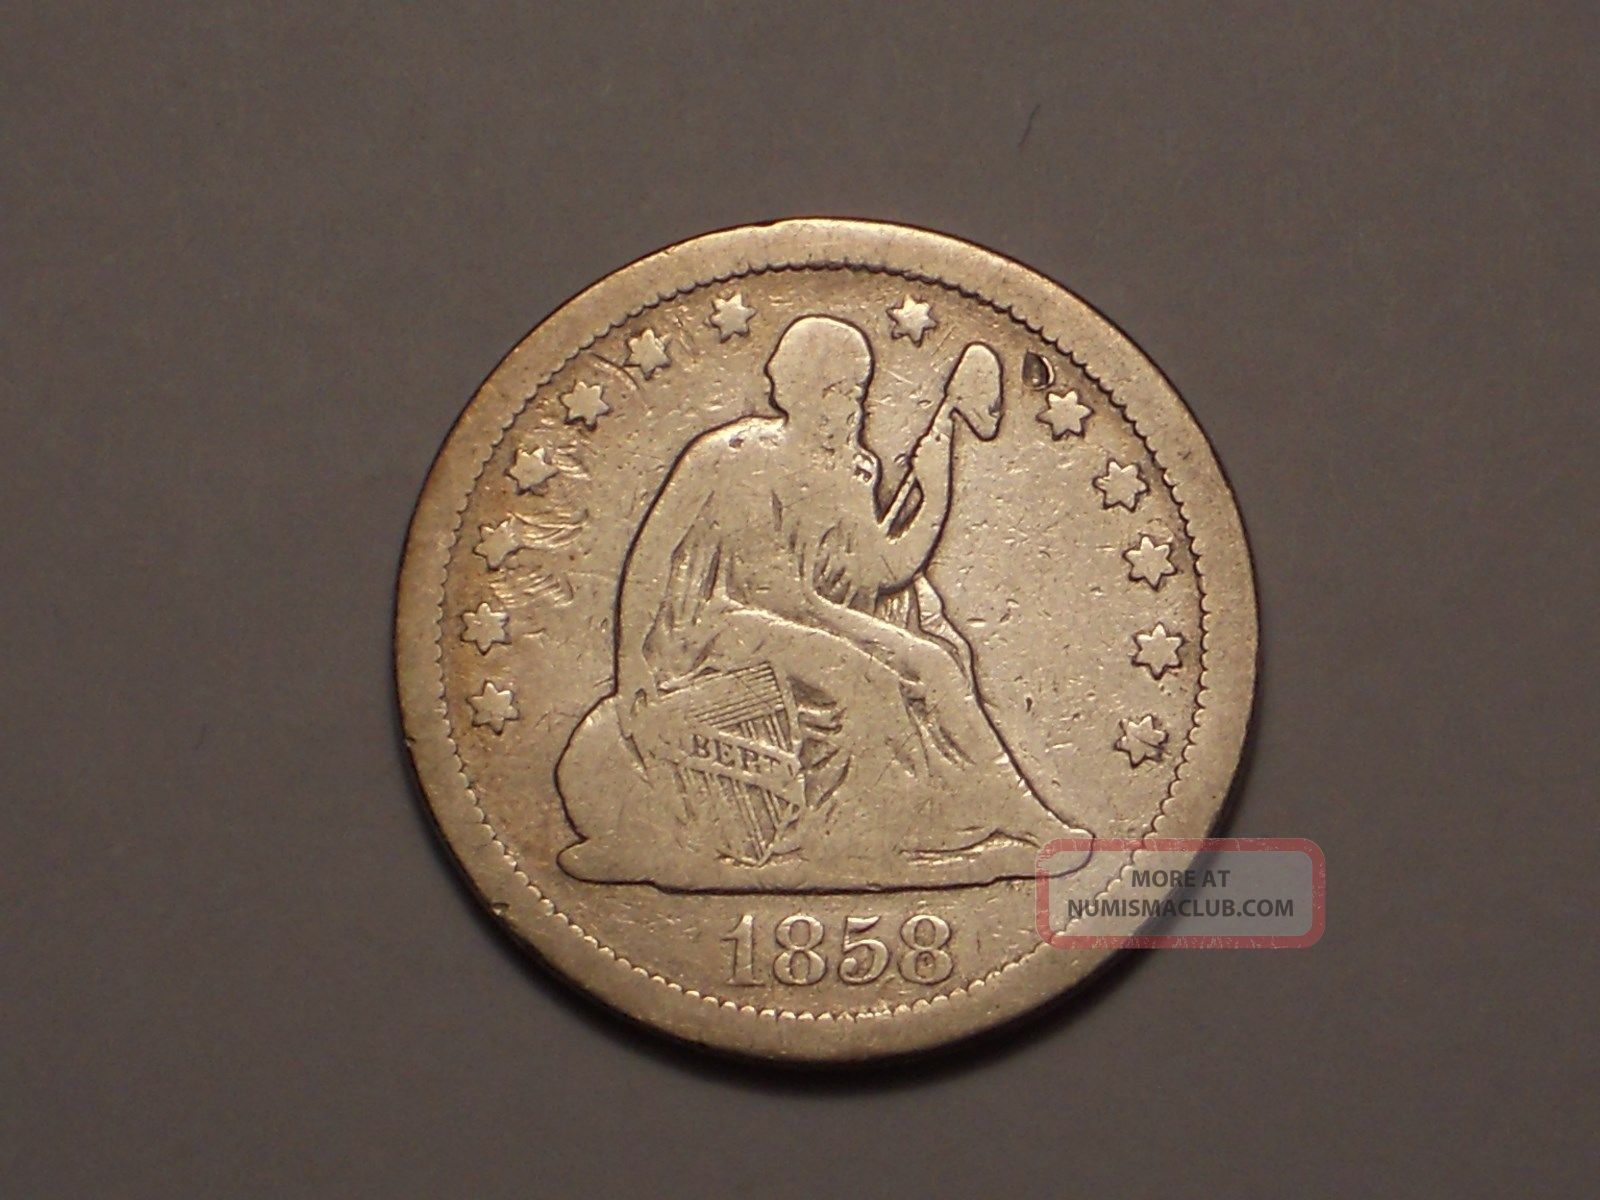 1858 Seated Liberty Quarter (attractive)